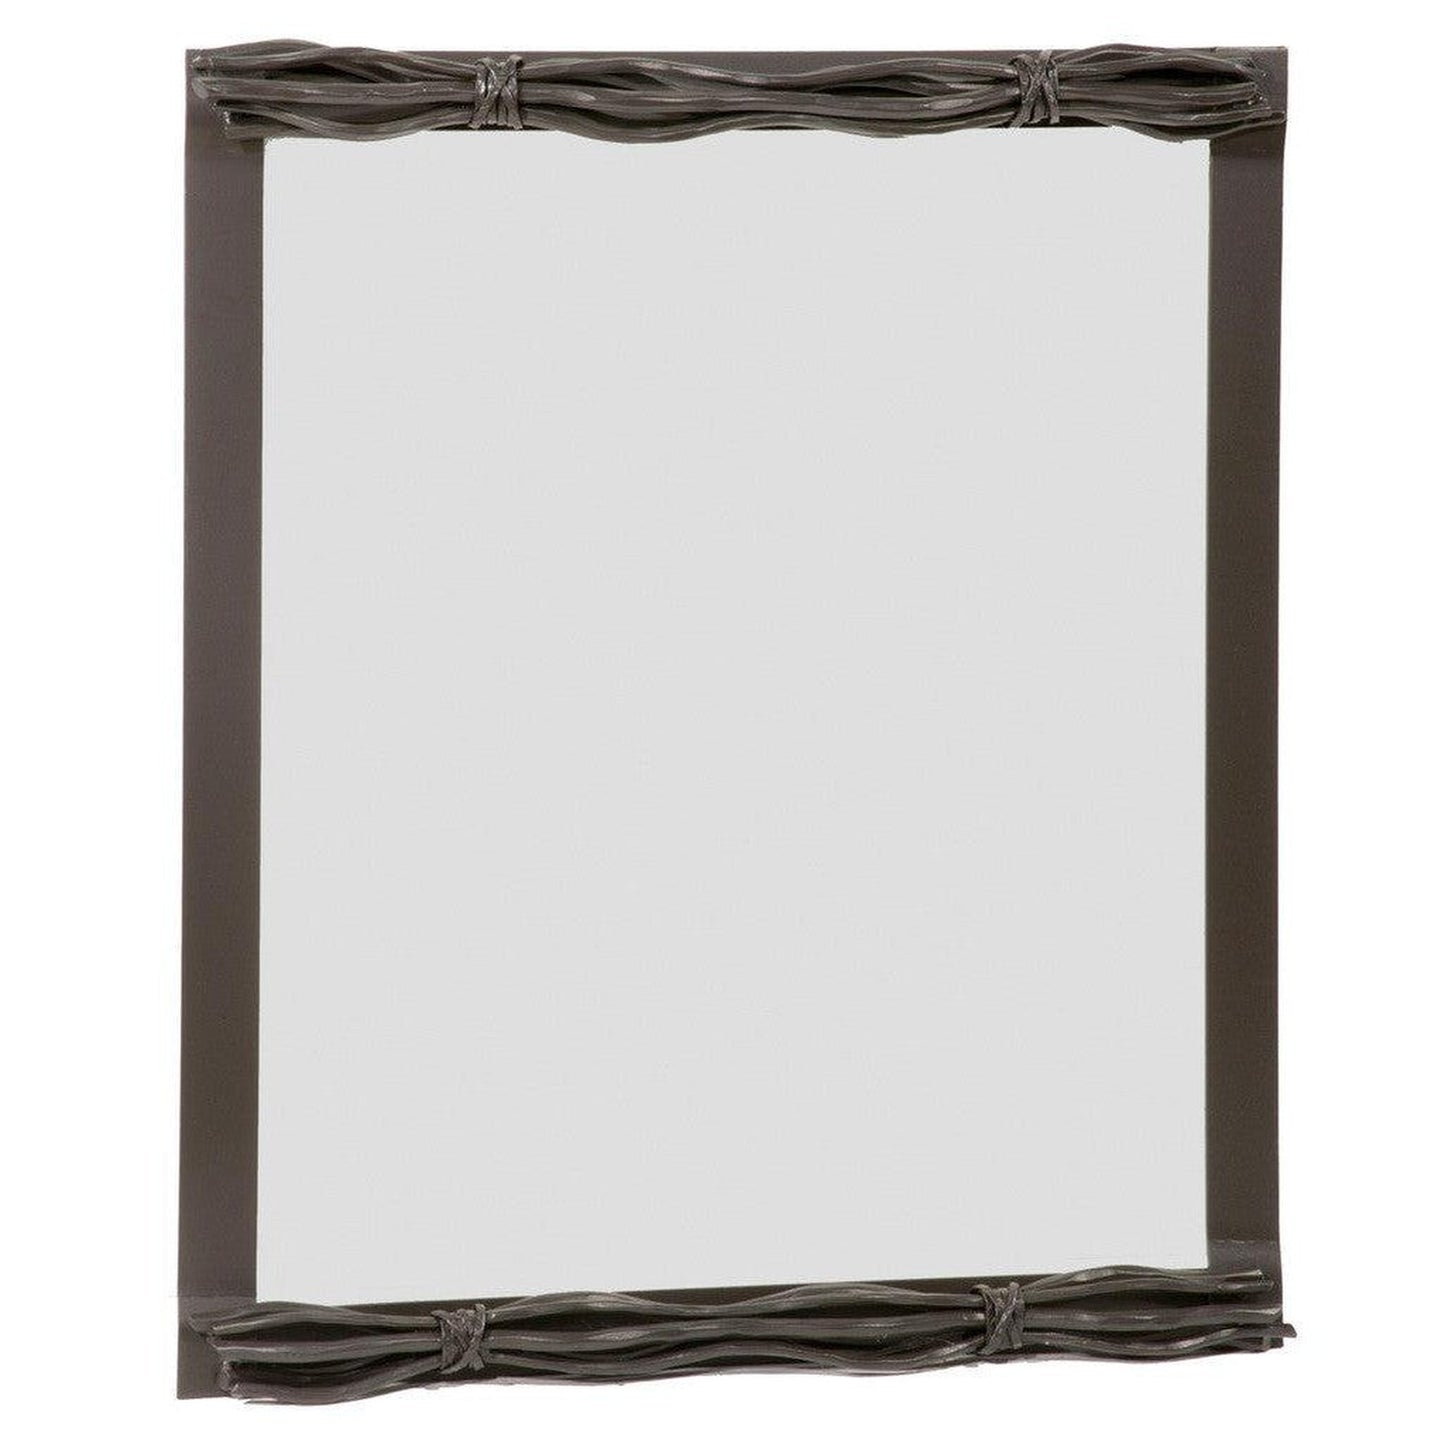 Stone County Ironworks Rush 21" x 26" Small Woodland Brown Iron Wall Mirror With Copper Iron Accent